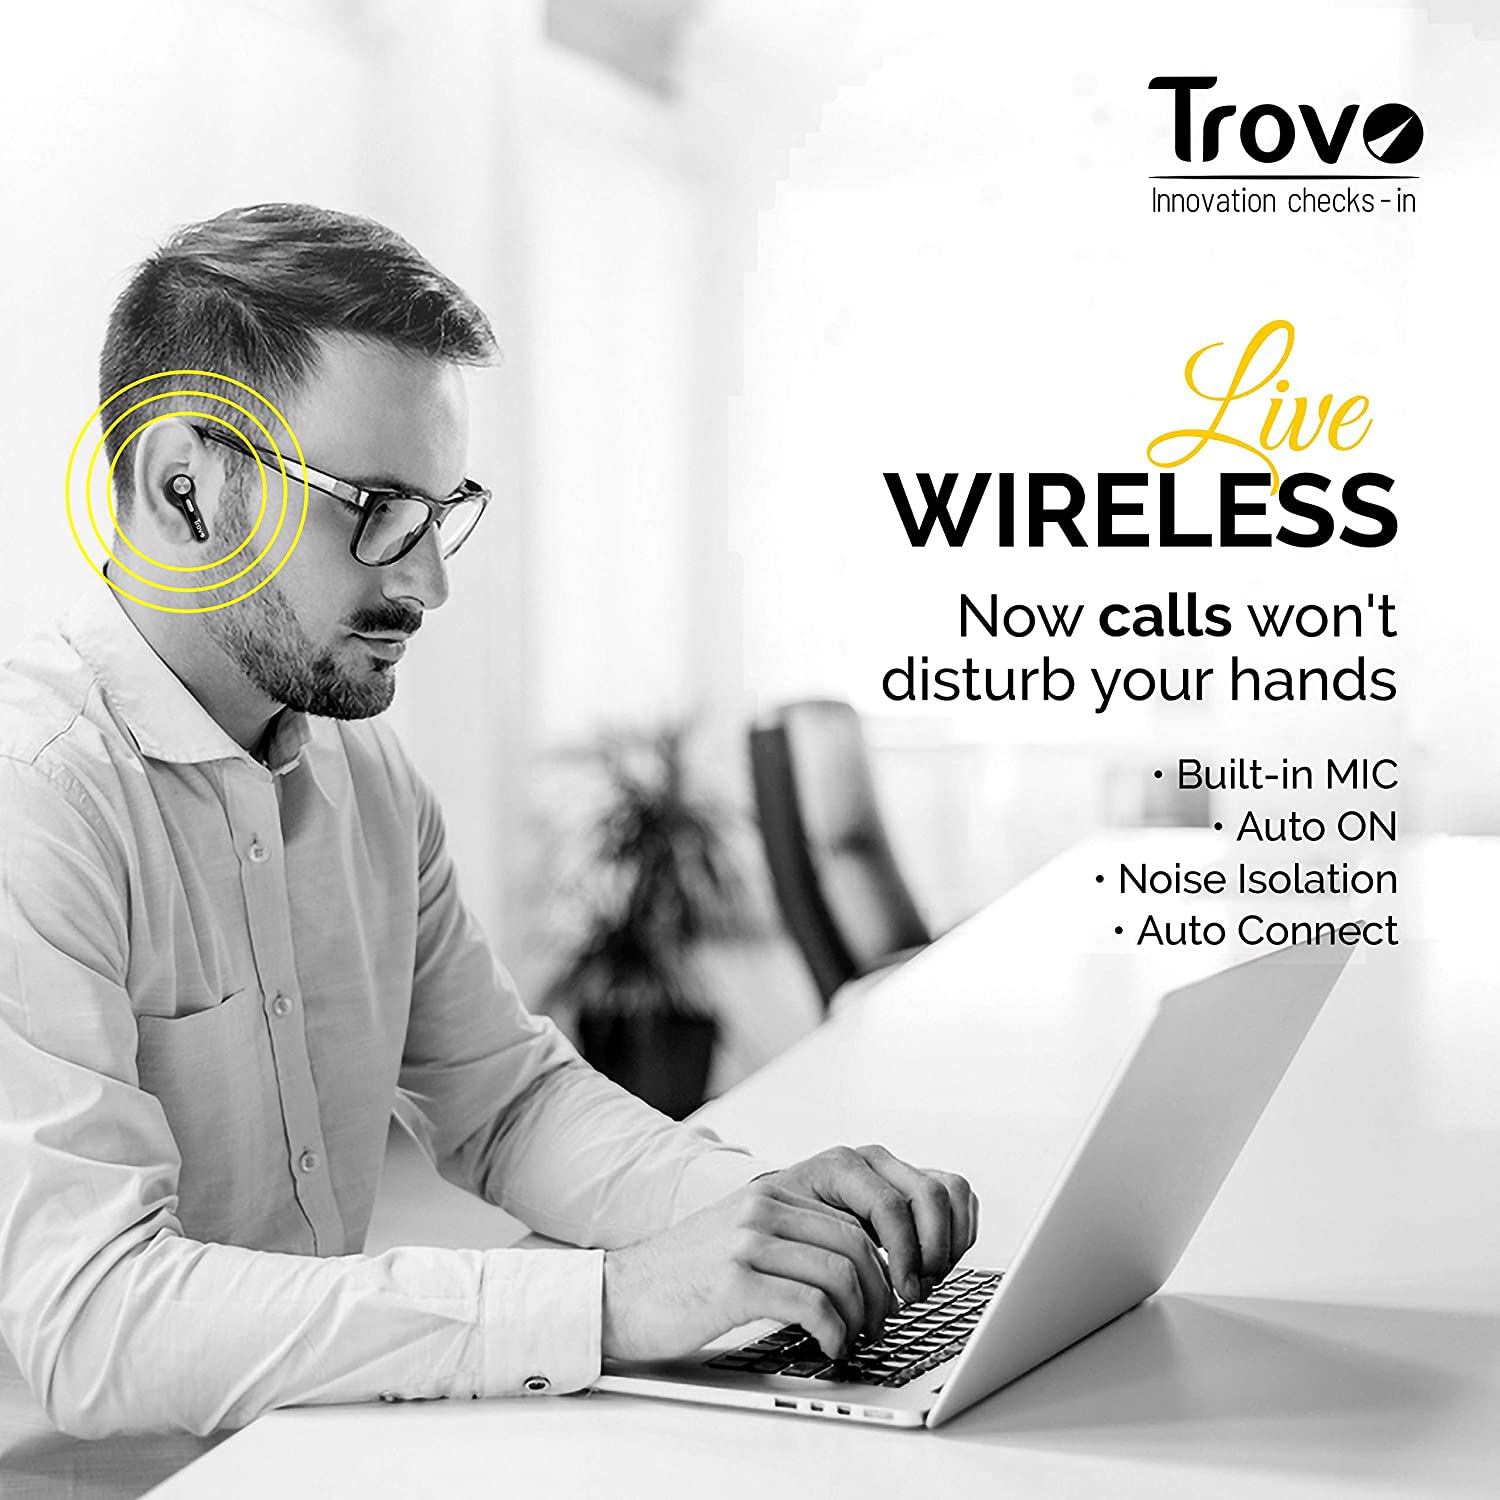 Trovo REP-35 Rhythm True Wireless Voice Assistant Bluetooth Headset Earphone with Mic -Black